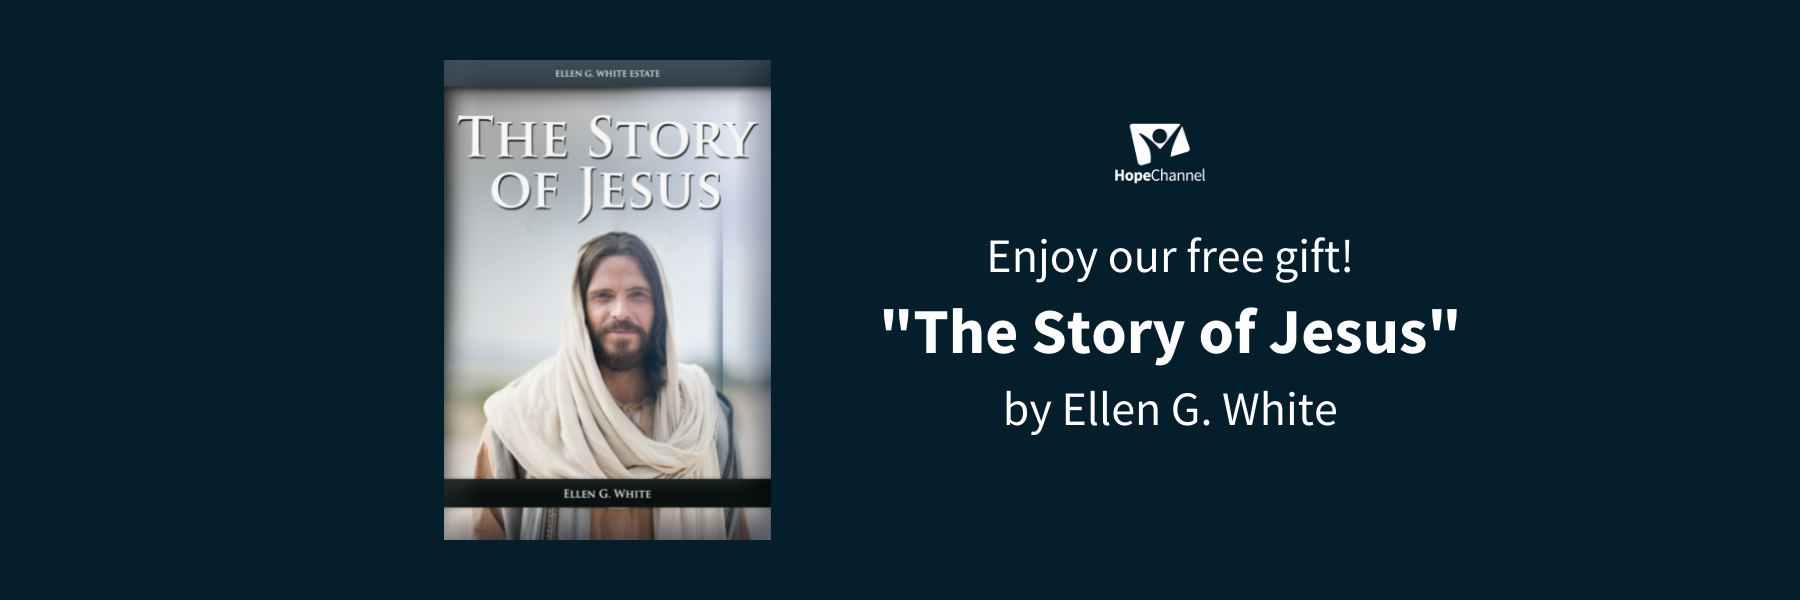 Enjoy our free gift! The Story of Jesus by Ellen G. White-1